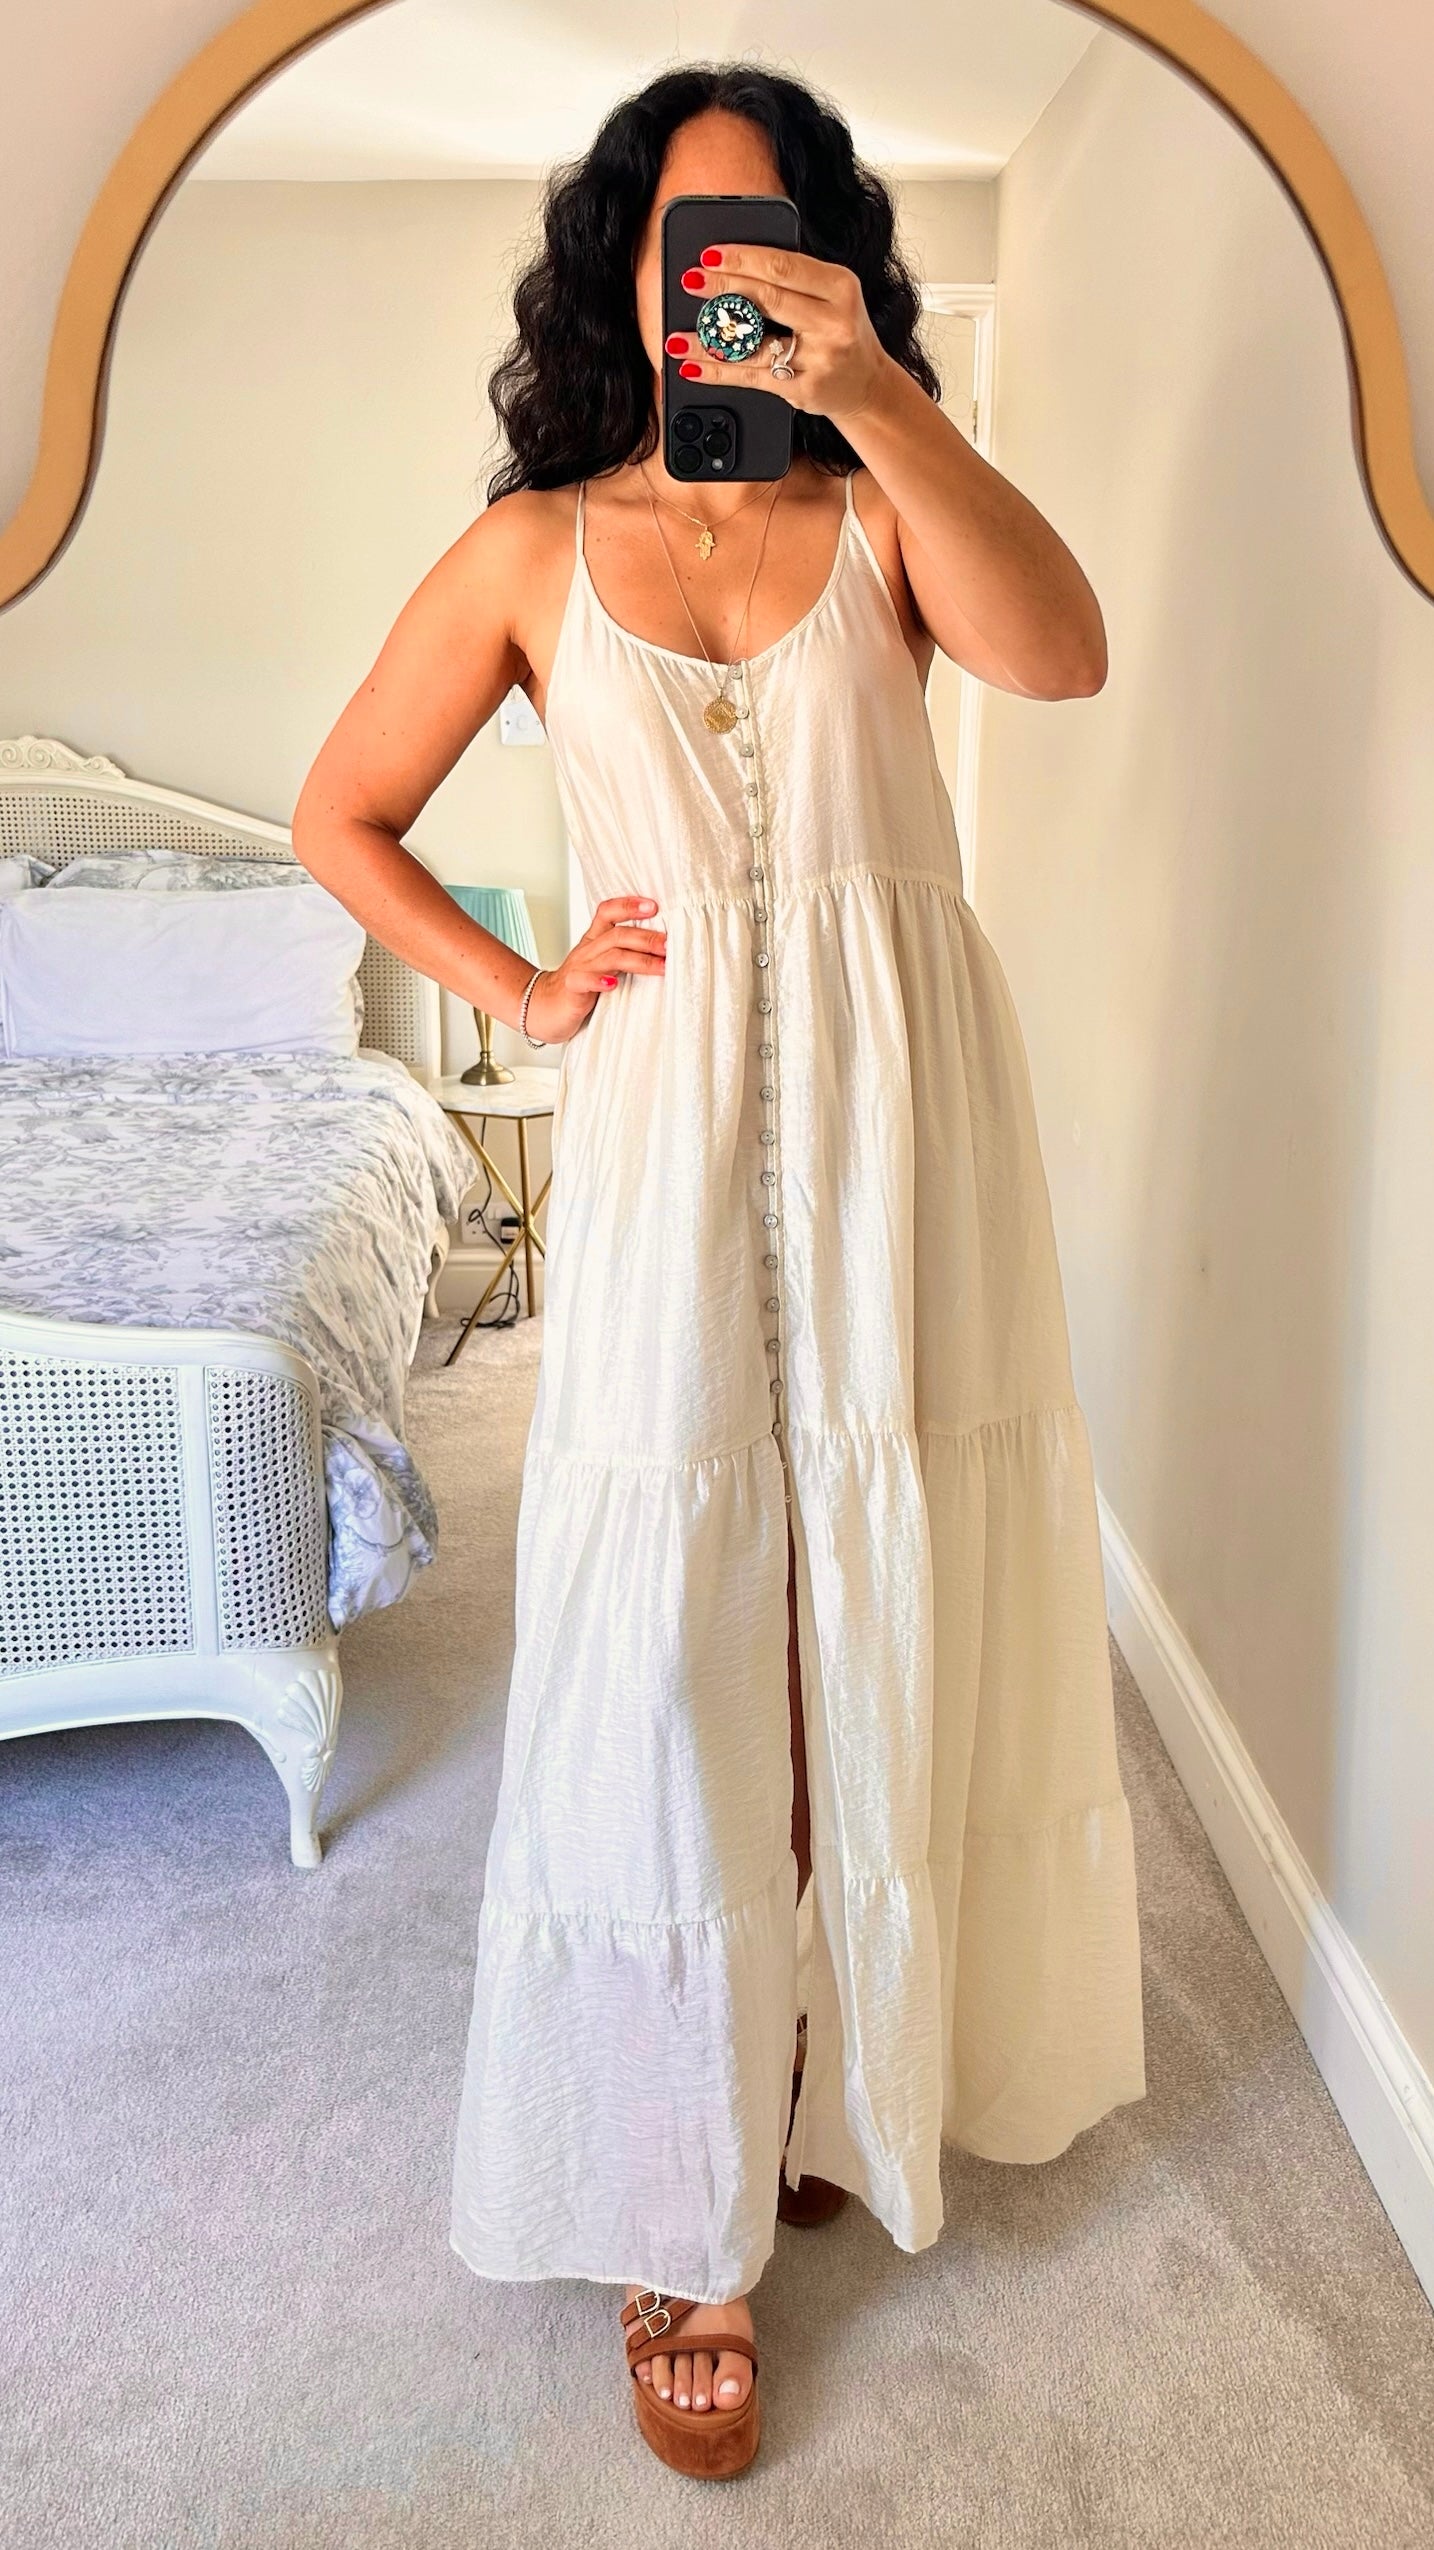 & Other stories pearlescent oyster cream shimmer button up evening boho maxi dress extra large XL UK 14